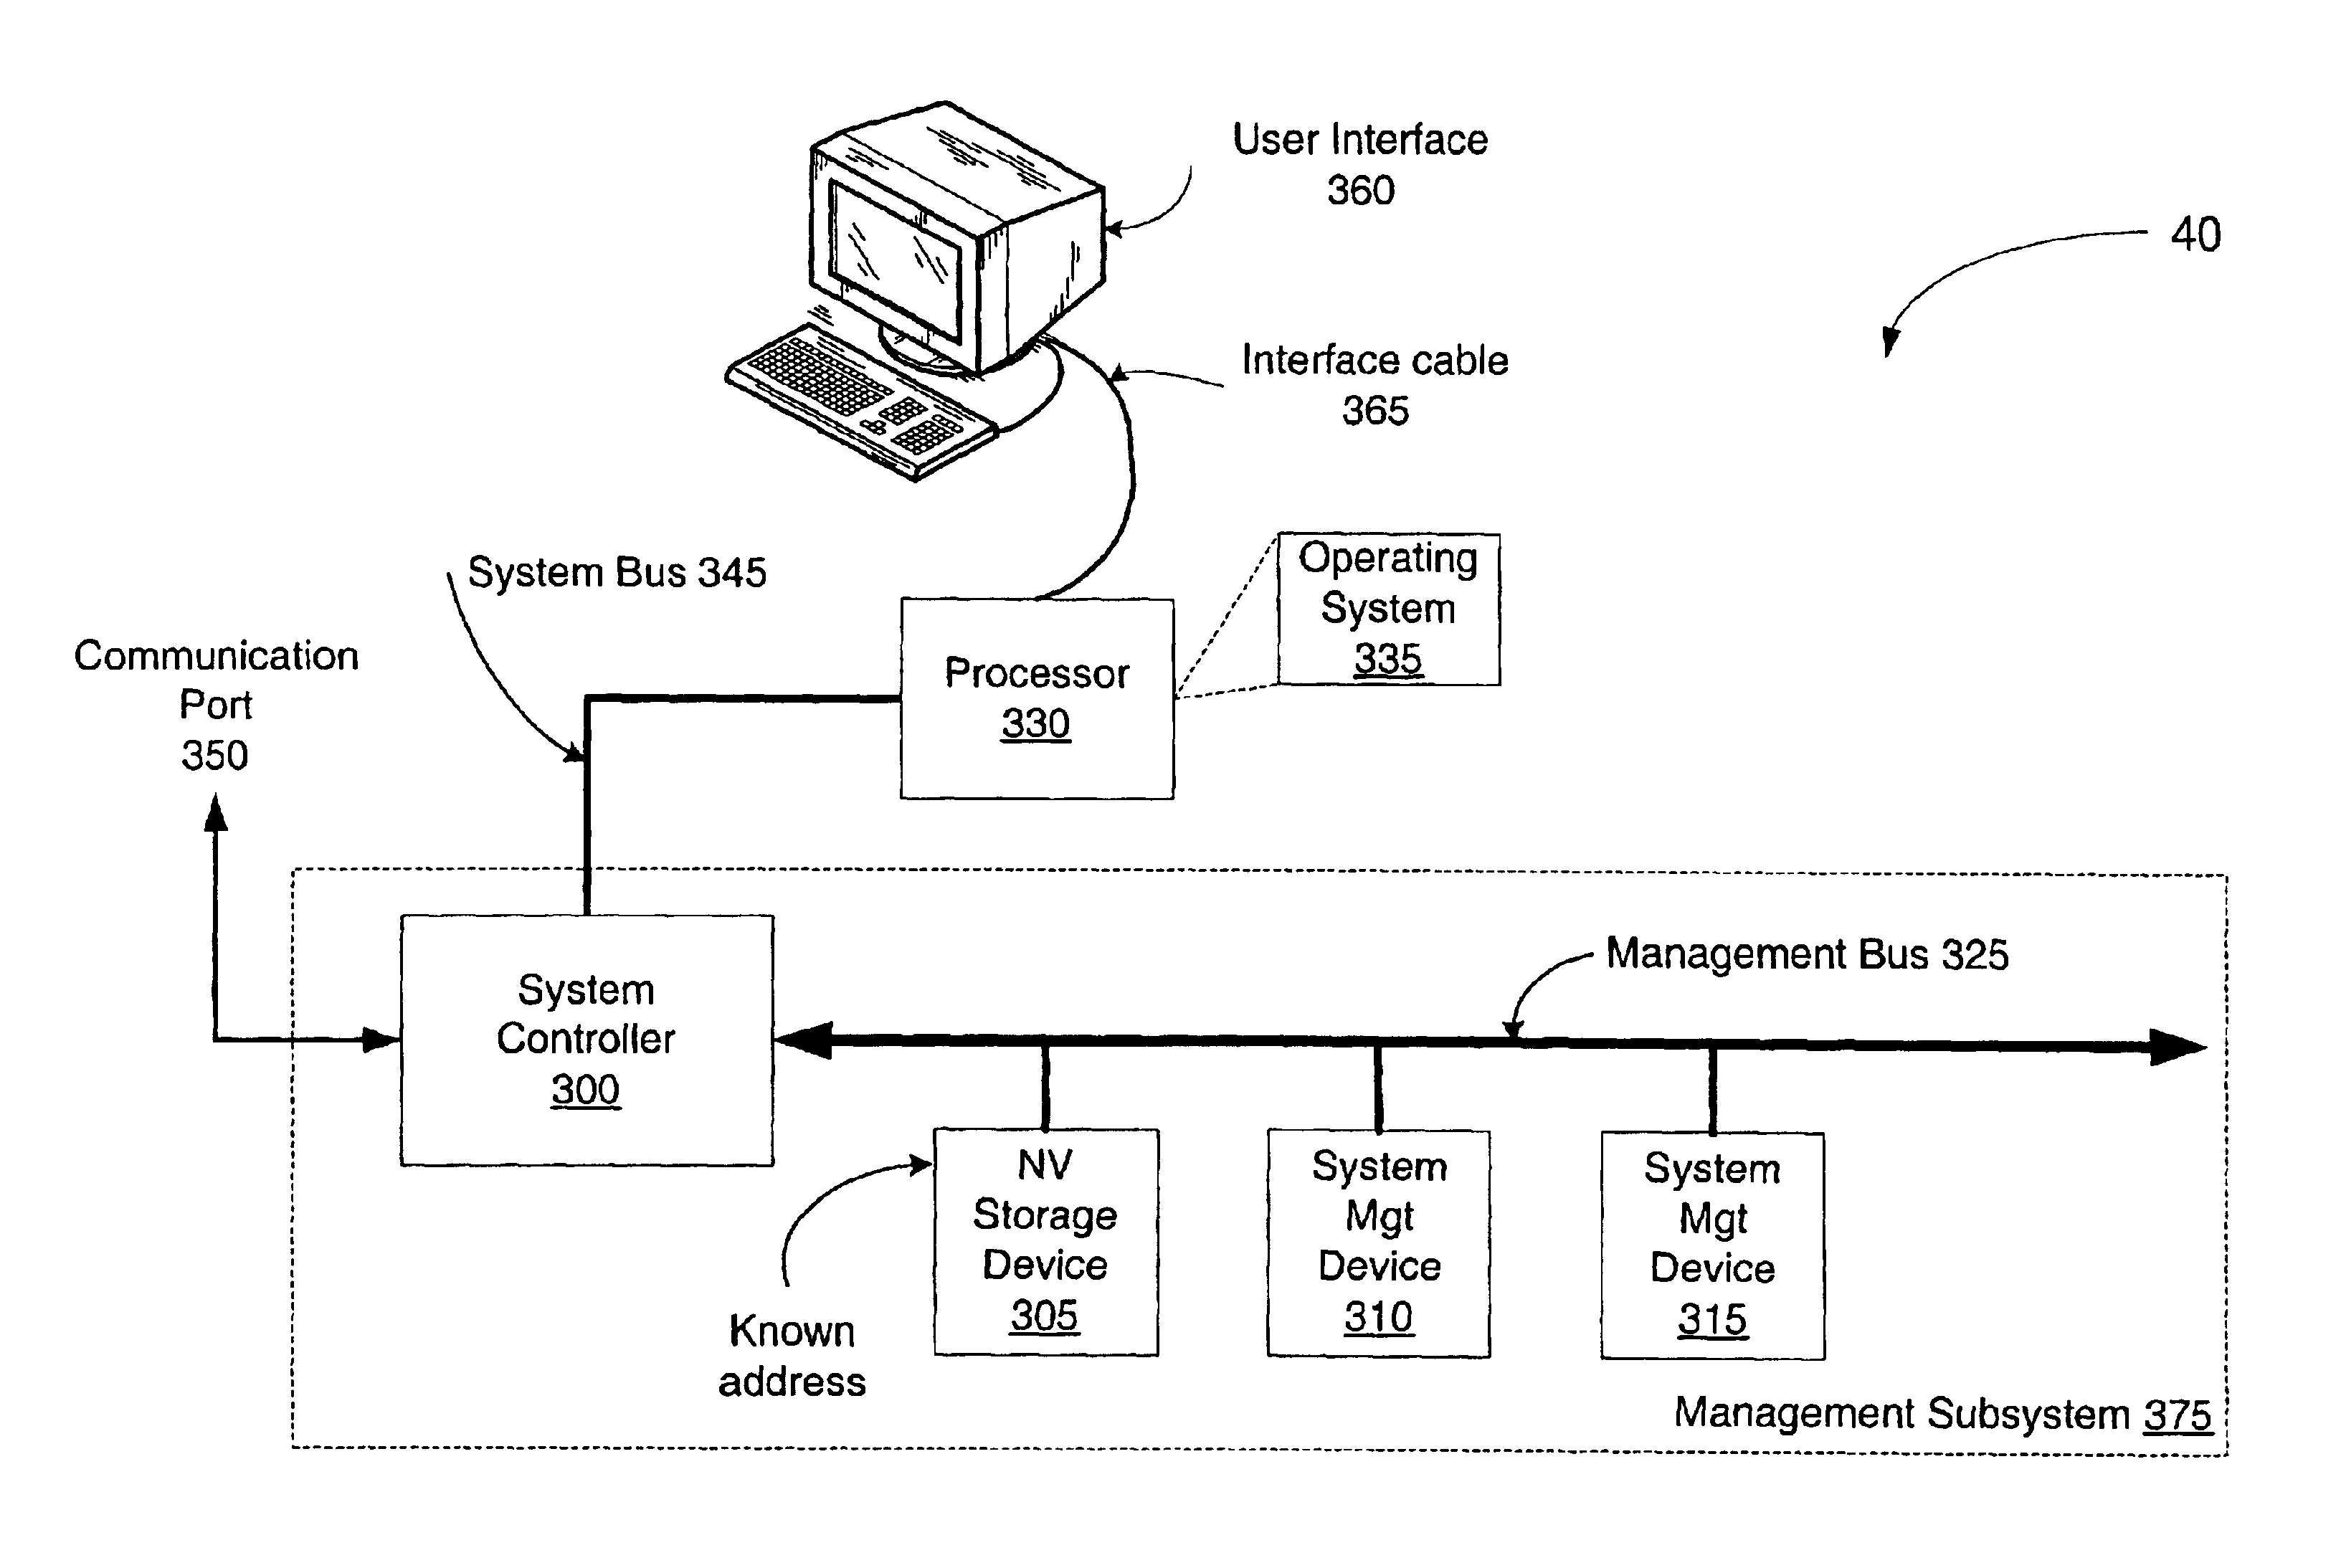 Management subsystem and method for discovering management device functions